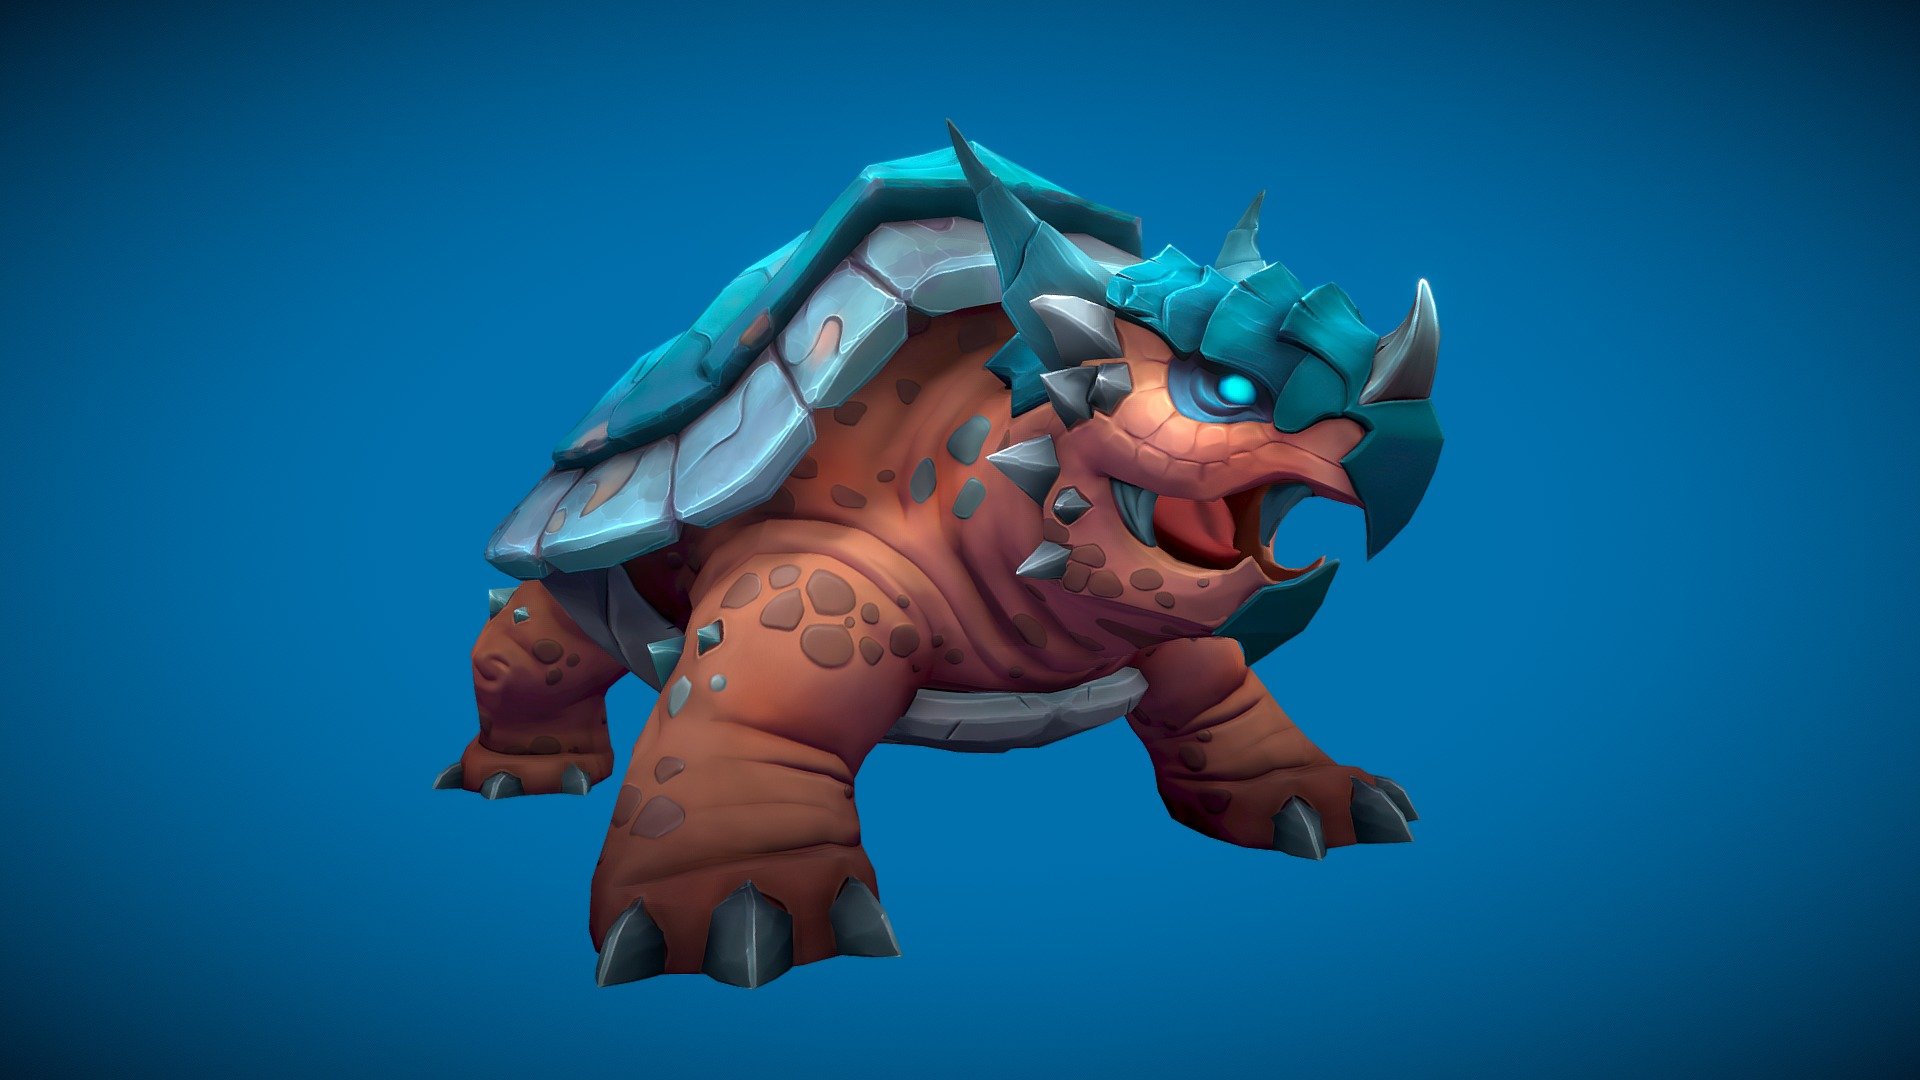 Stylized character for a project.

Software used: Zbrush, Autodesk Maya, Autodesk 3ds Max, Substance Painter - Stylized Fantasy Turtle - 3D model by N-hance Studio (@Malice6731) 3d model